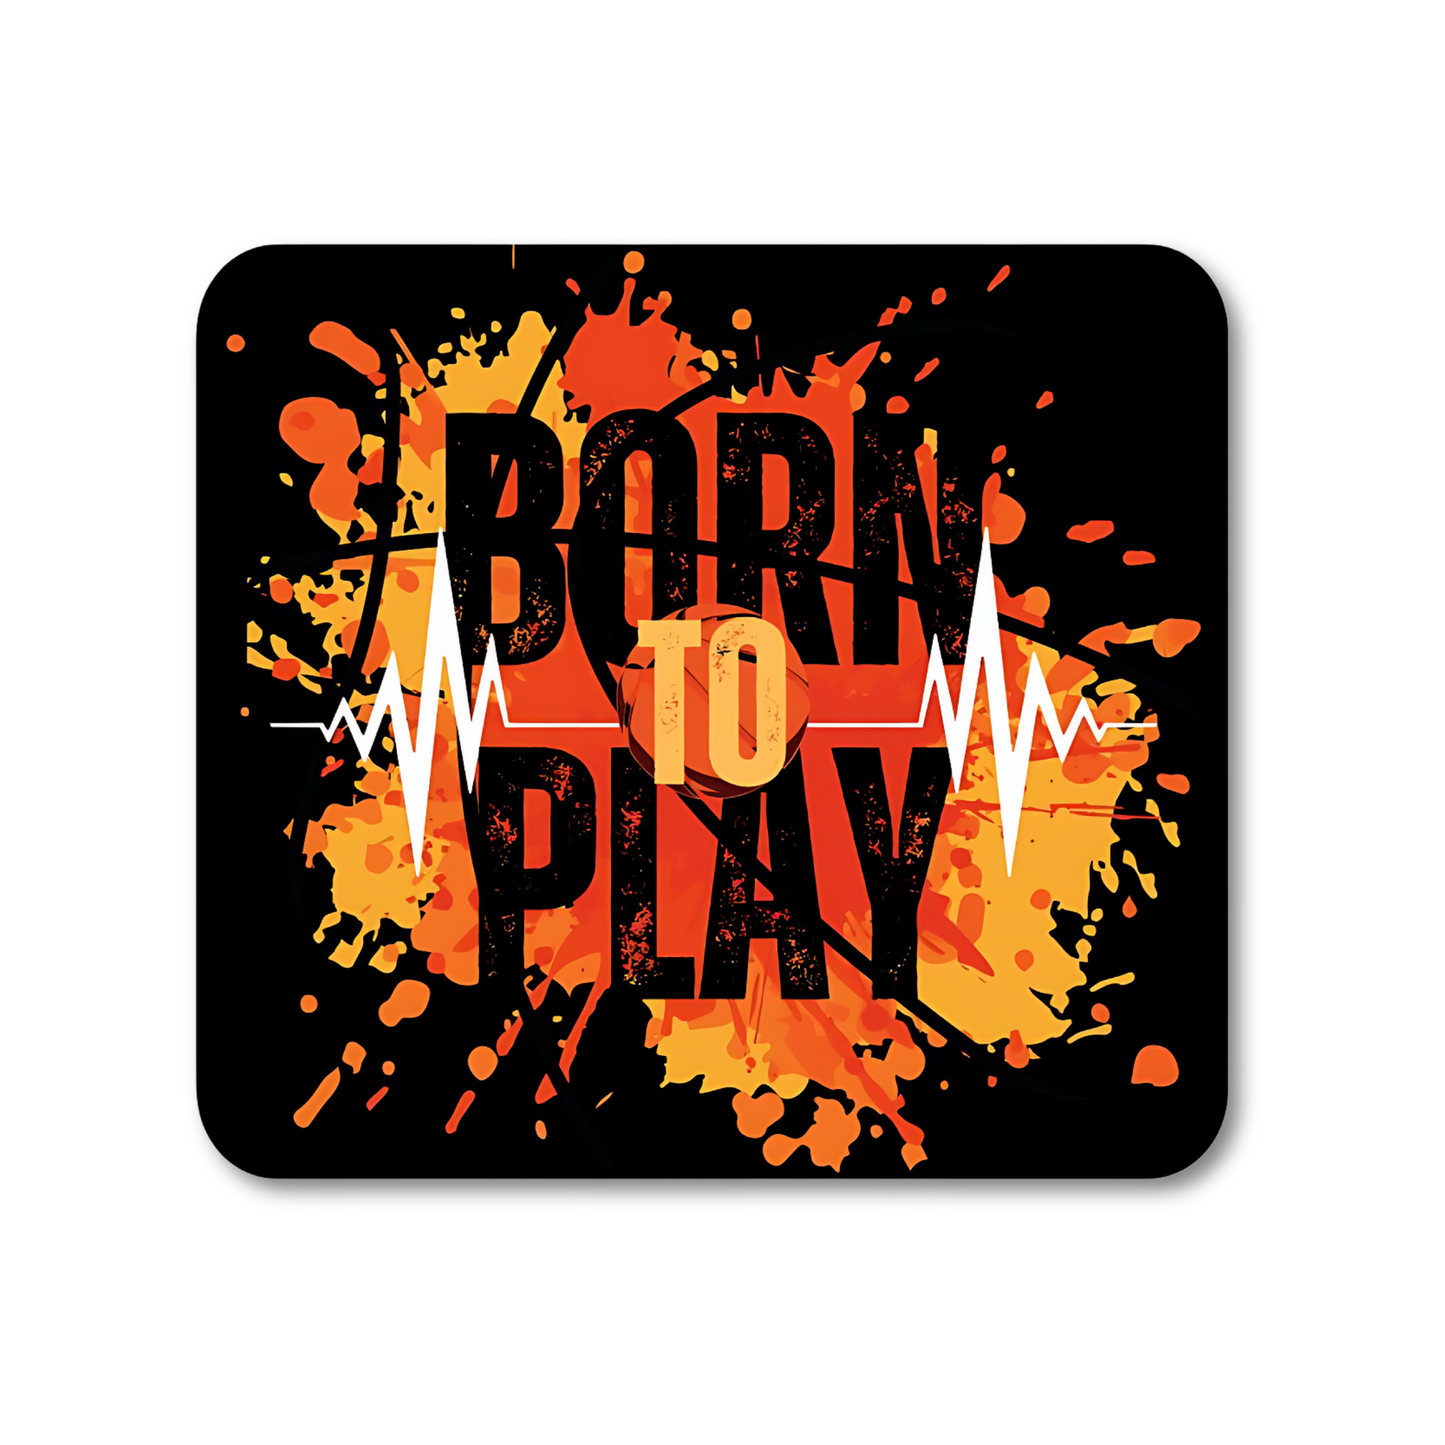 Born to play - Mouse Pad